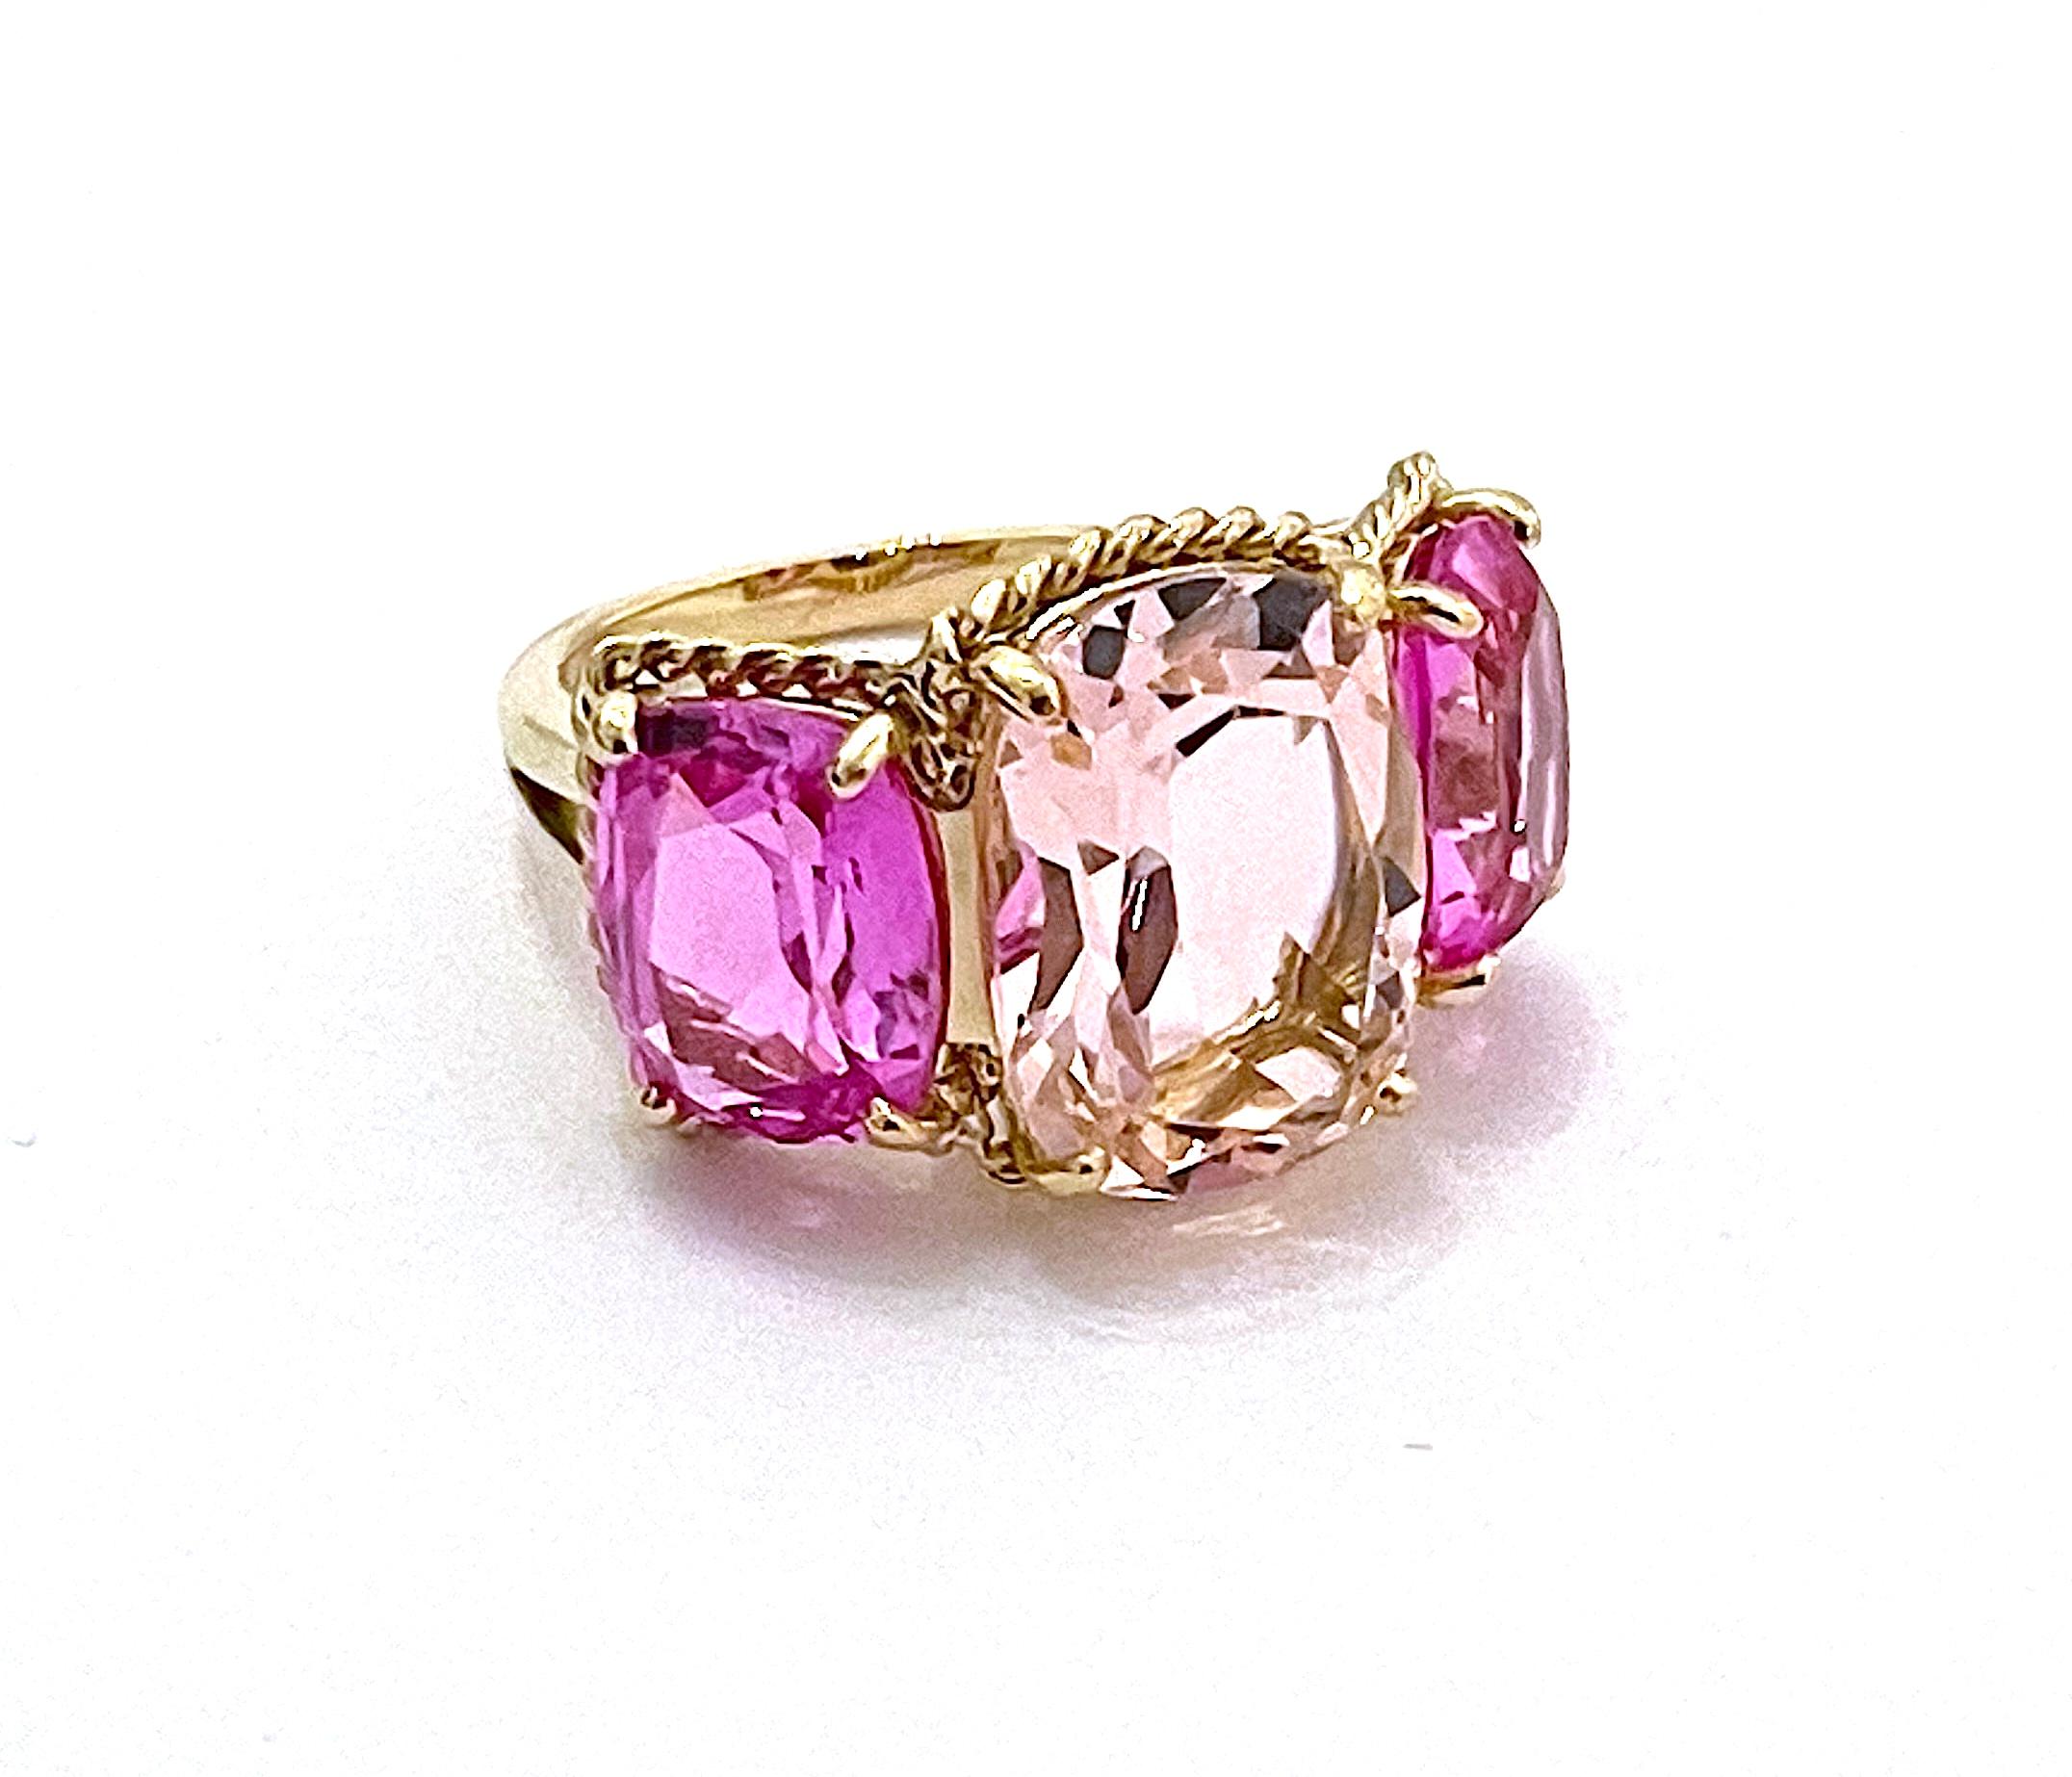 Elegant Three-Stone Rock Crystal and Pink Topaz Ring with Gold Rope Twist Border In New Condition For Sale In New York, NY